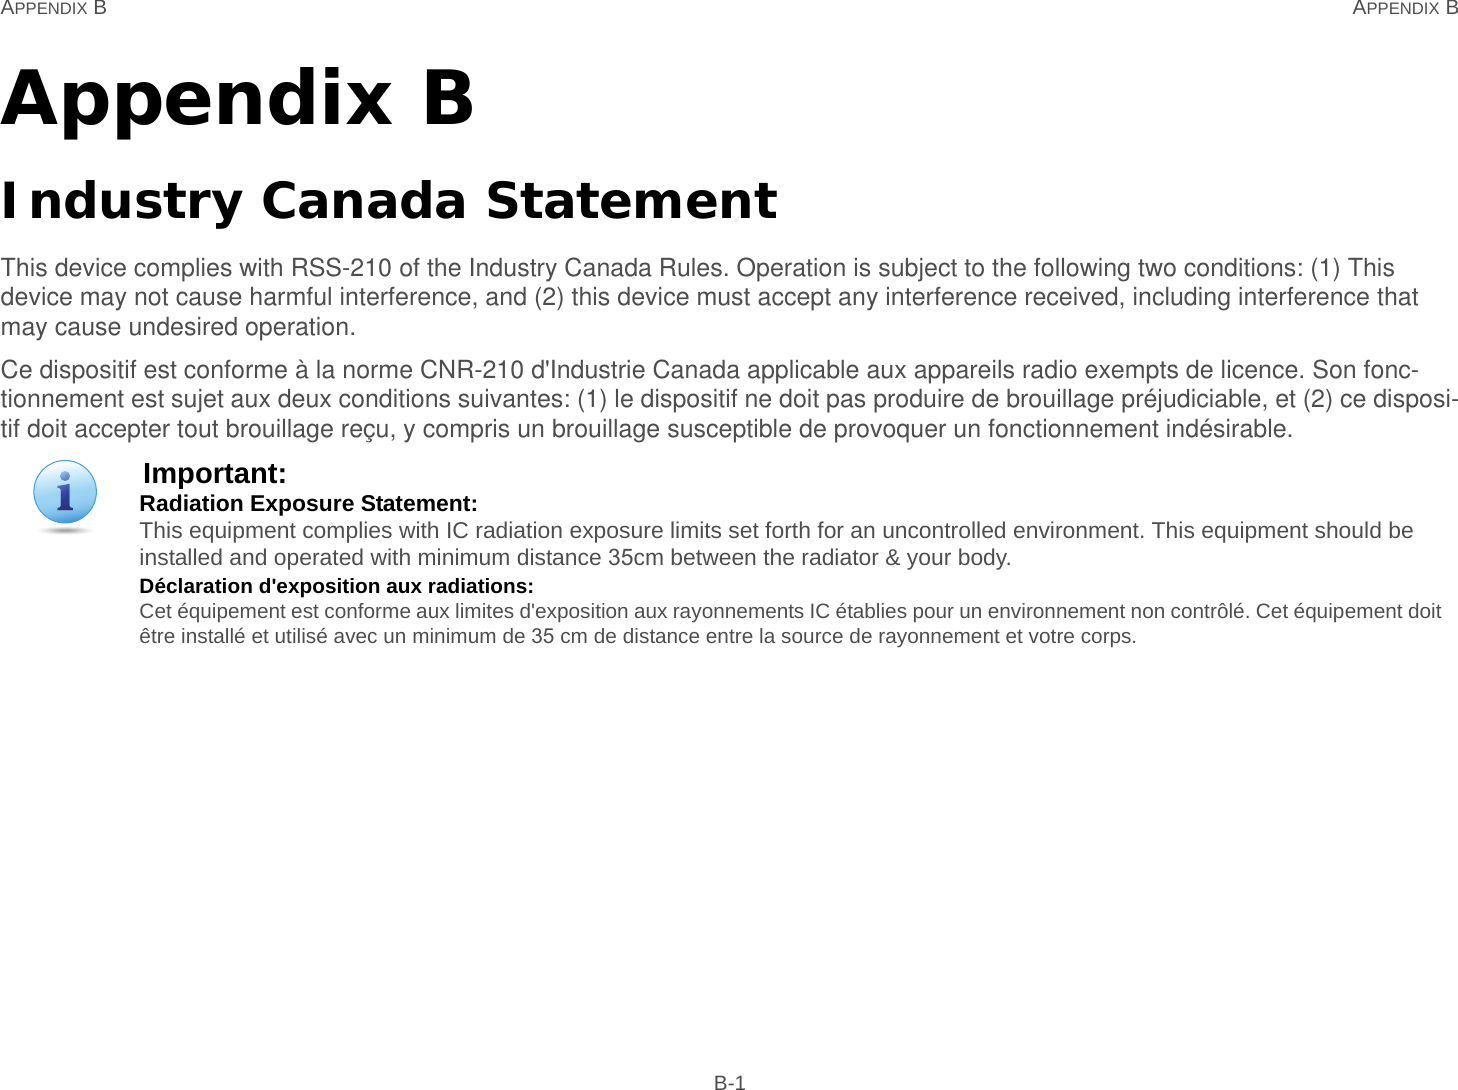 APPENDIX B APPENDIX B B-1Appendix BIndustry Canada StatementThis device complies with RSS-210 of the Industry Canada Rules. Operation is subject to the following two conditions: (1) This device may not cause harmful interference, and (2) this device must accept any interference received, including interference that may cause undesired operation.Ce dispositif est conforme à la norme CNR-210 d&apos;Industrie Canada applicable aux appareils radio exempts de licence. Son fonc-tionnement est sujet aux deux conditions suivantes: (1) le dispositif ne doit pas produire de brouillage préjudiciable, et (2) ce disposi-tif doit accepter tout brouillage reçu, y compris un brouillage susceptible de provoquer un fonctionnement indésirable.Important:Radiation Exposure Statement: This equipment complies with IC radiation exposure limits set forth for an uncontrolled environment. This equipment should be installed and operated with minimum distance 35cm between the radiator &amp; your body.Déclaration d&apos;exposition aux radiations: Cet équipement est conforme aux limites d&apos;exposition aux rayonnements IC établies pour un environnement non contrôlé. Cet équipement doit être installé et utilisé avec un minimum de 35 cm de distance entre la source de rayonnement et votre corps.